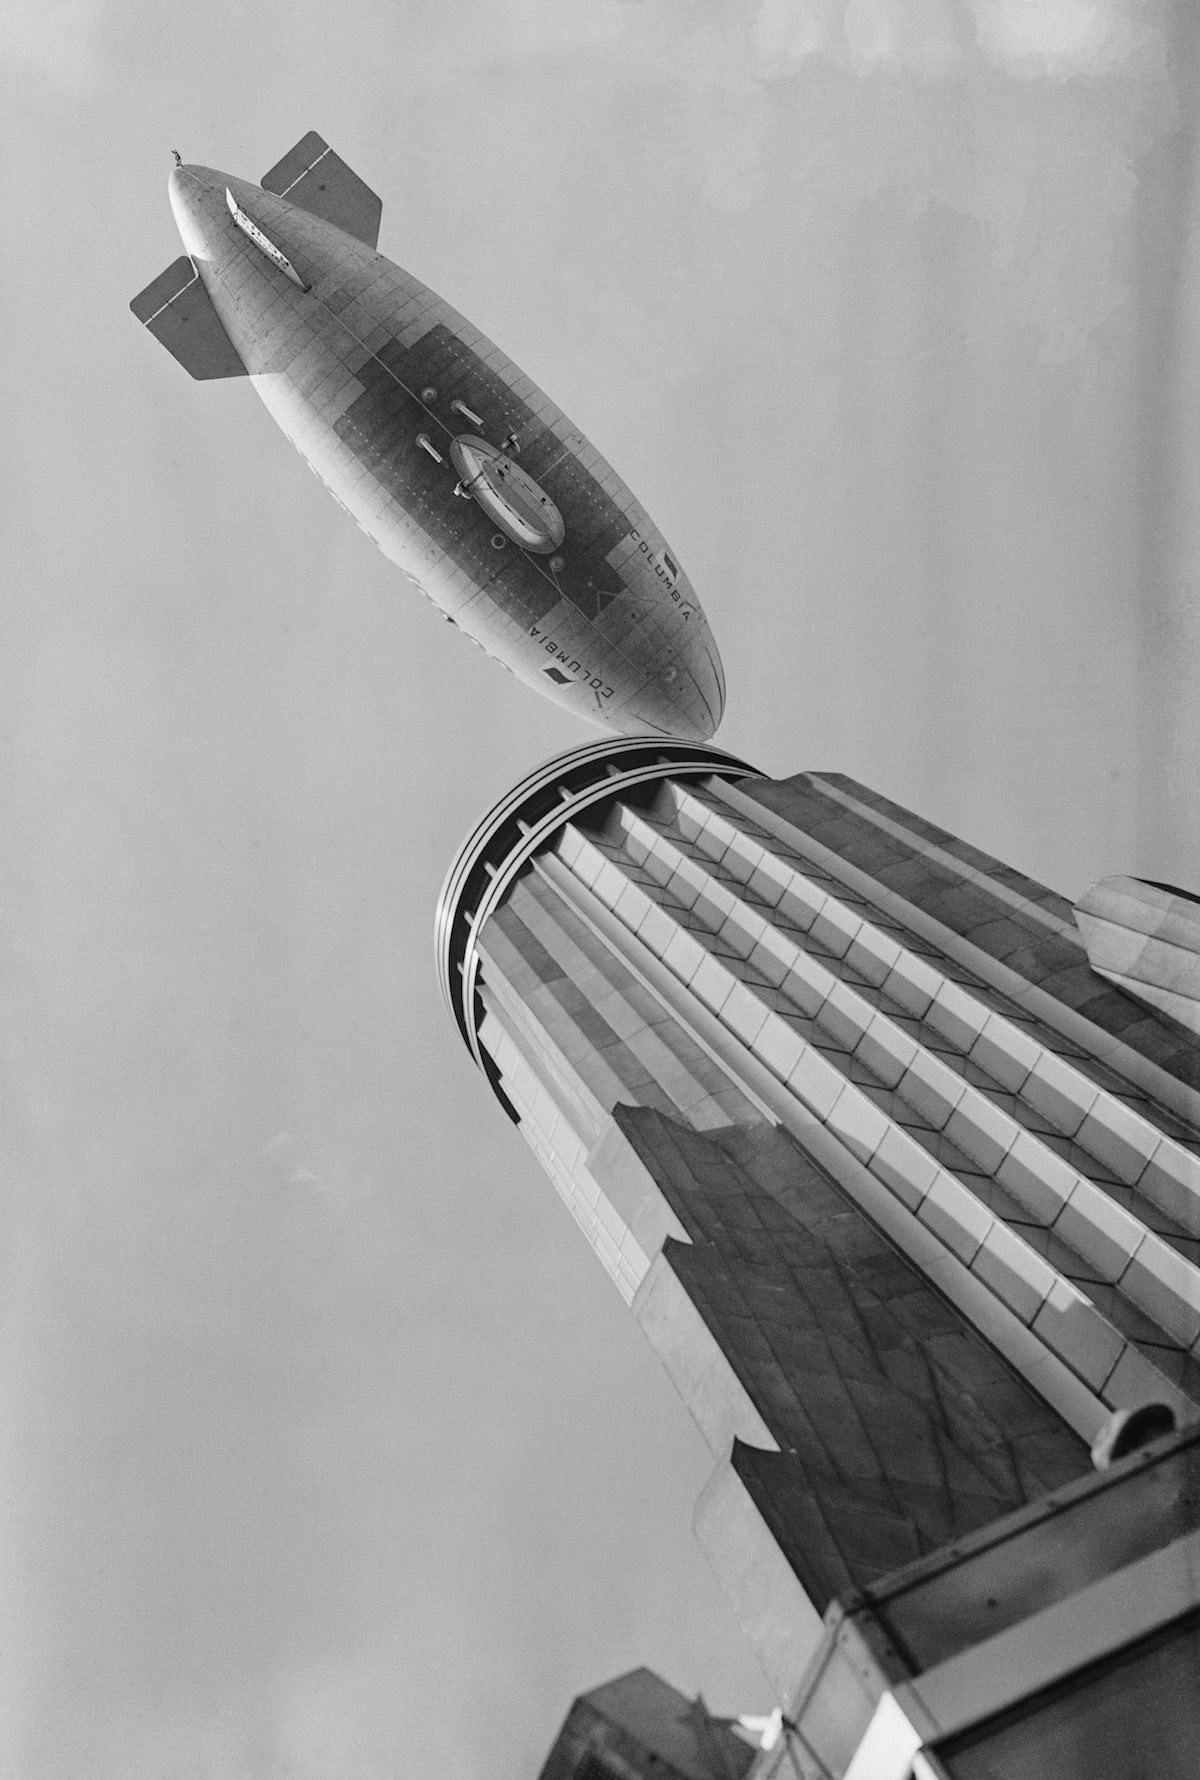 A 'blimp' flying over the Empire State Building.Sep. 29, 1931